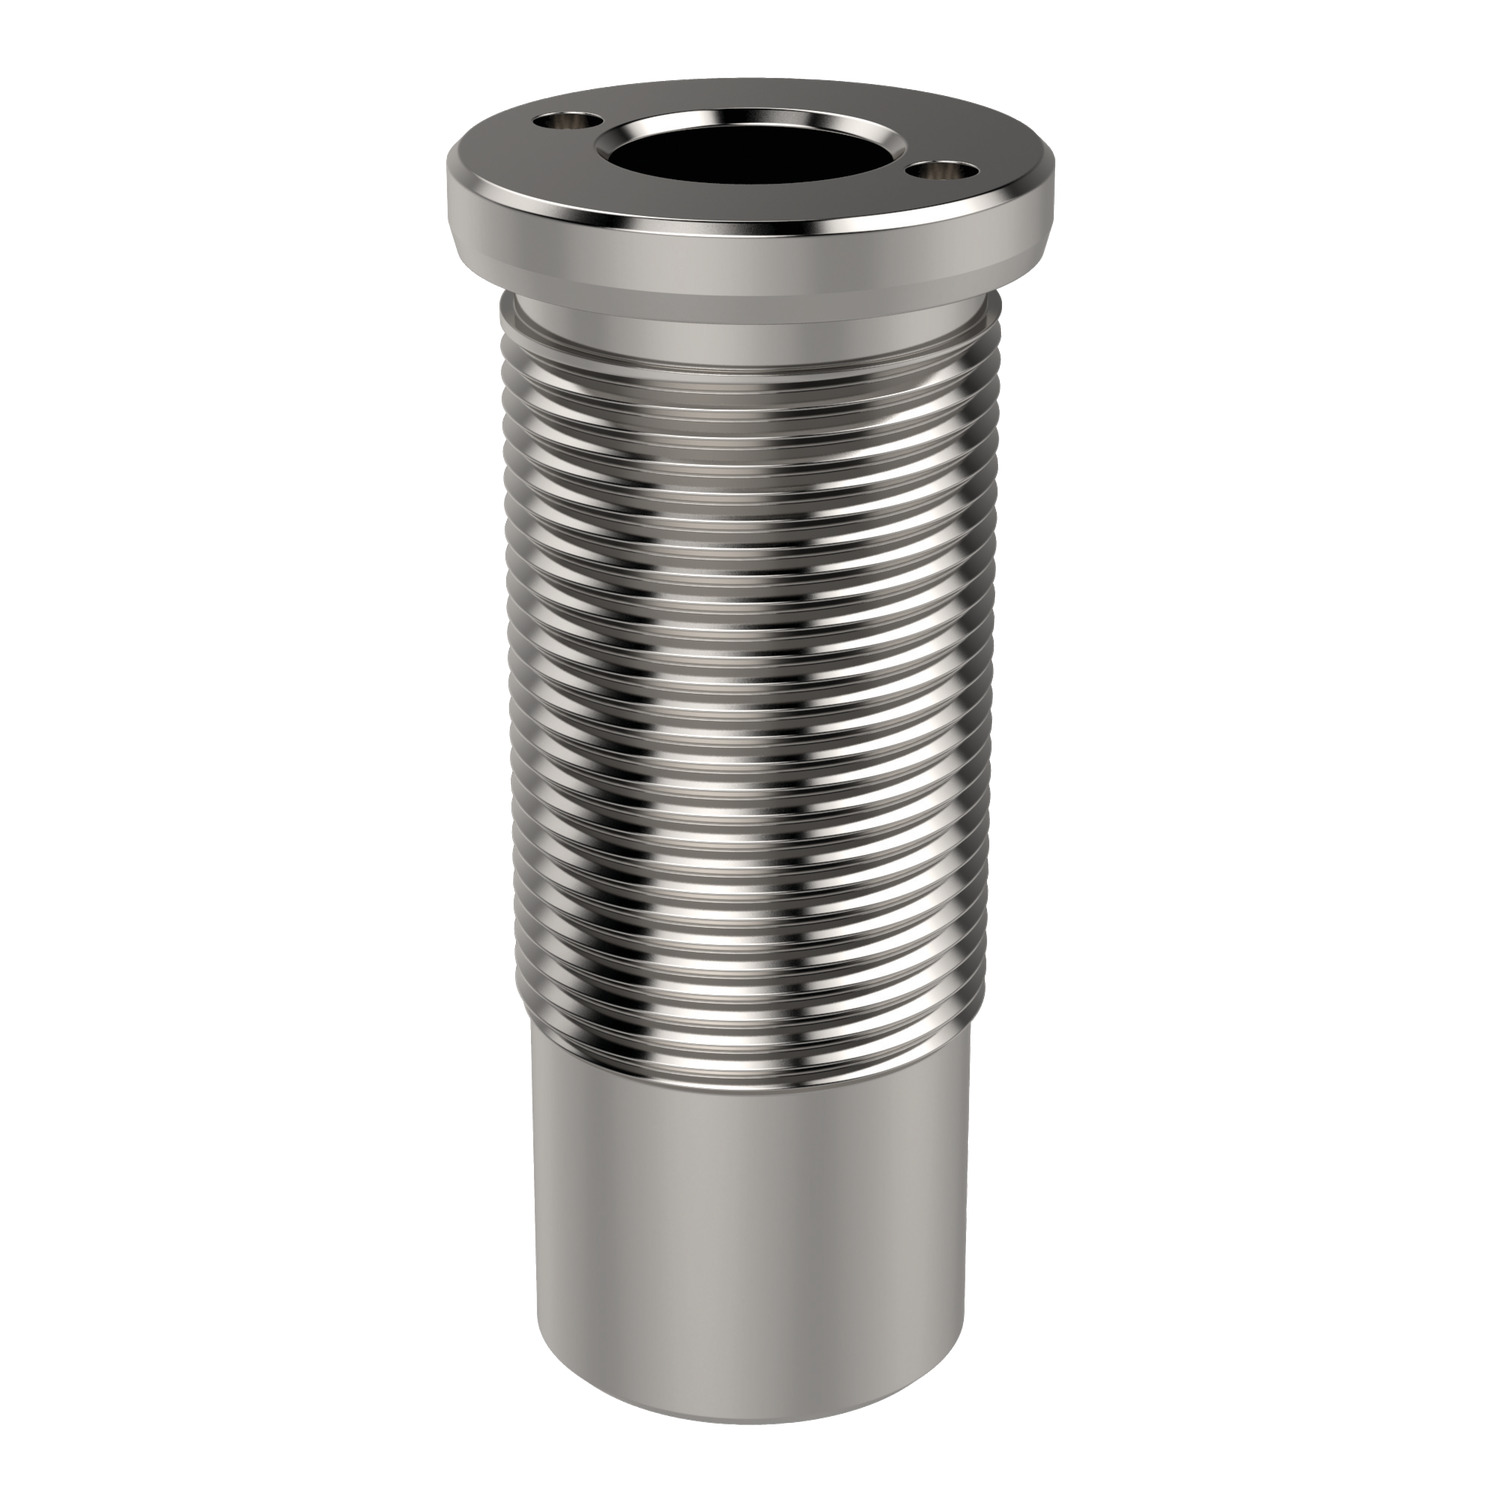 33442.W1920 Locating Bushings- Plain For use with Lifting Pins without seal- 12 - M24 x 1.5